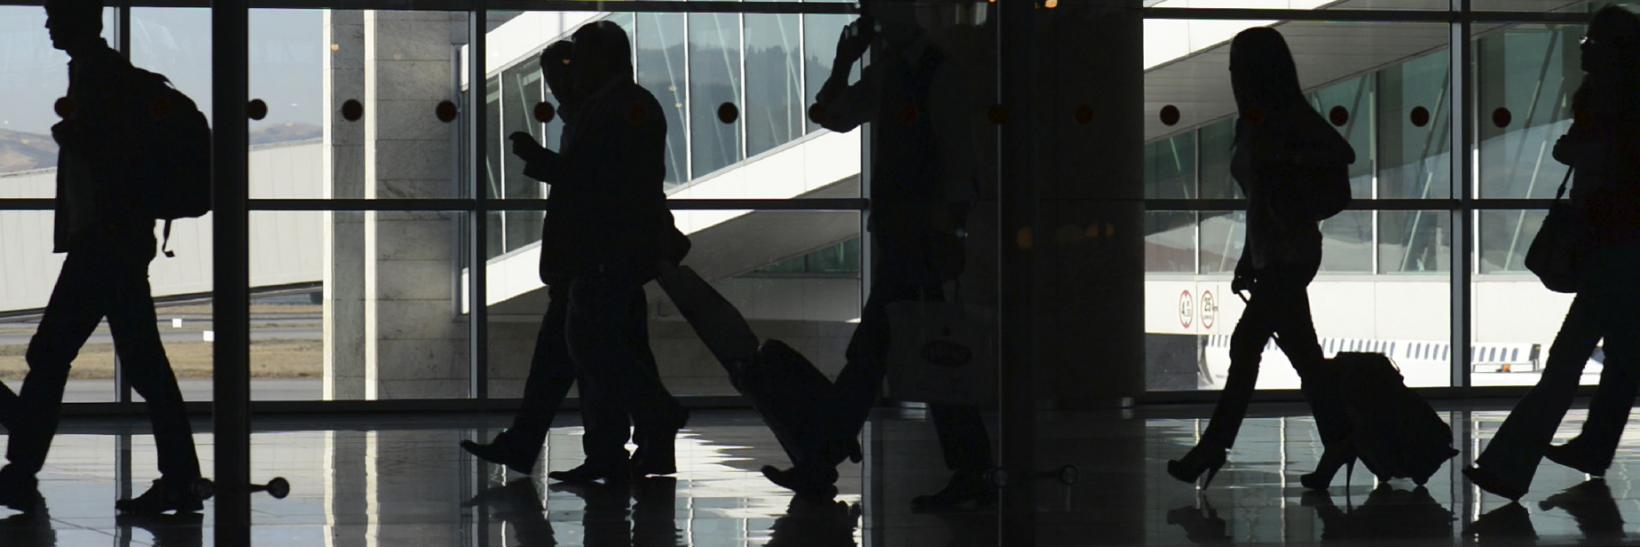 Silhouettes of travels in an airport terminal 